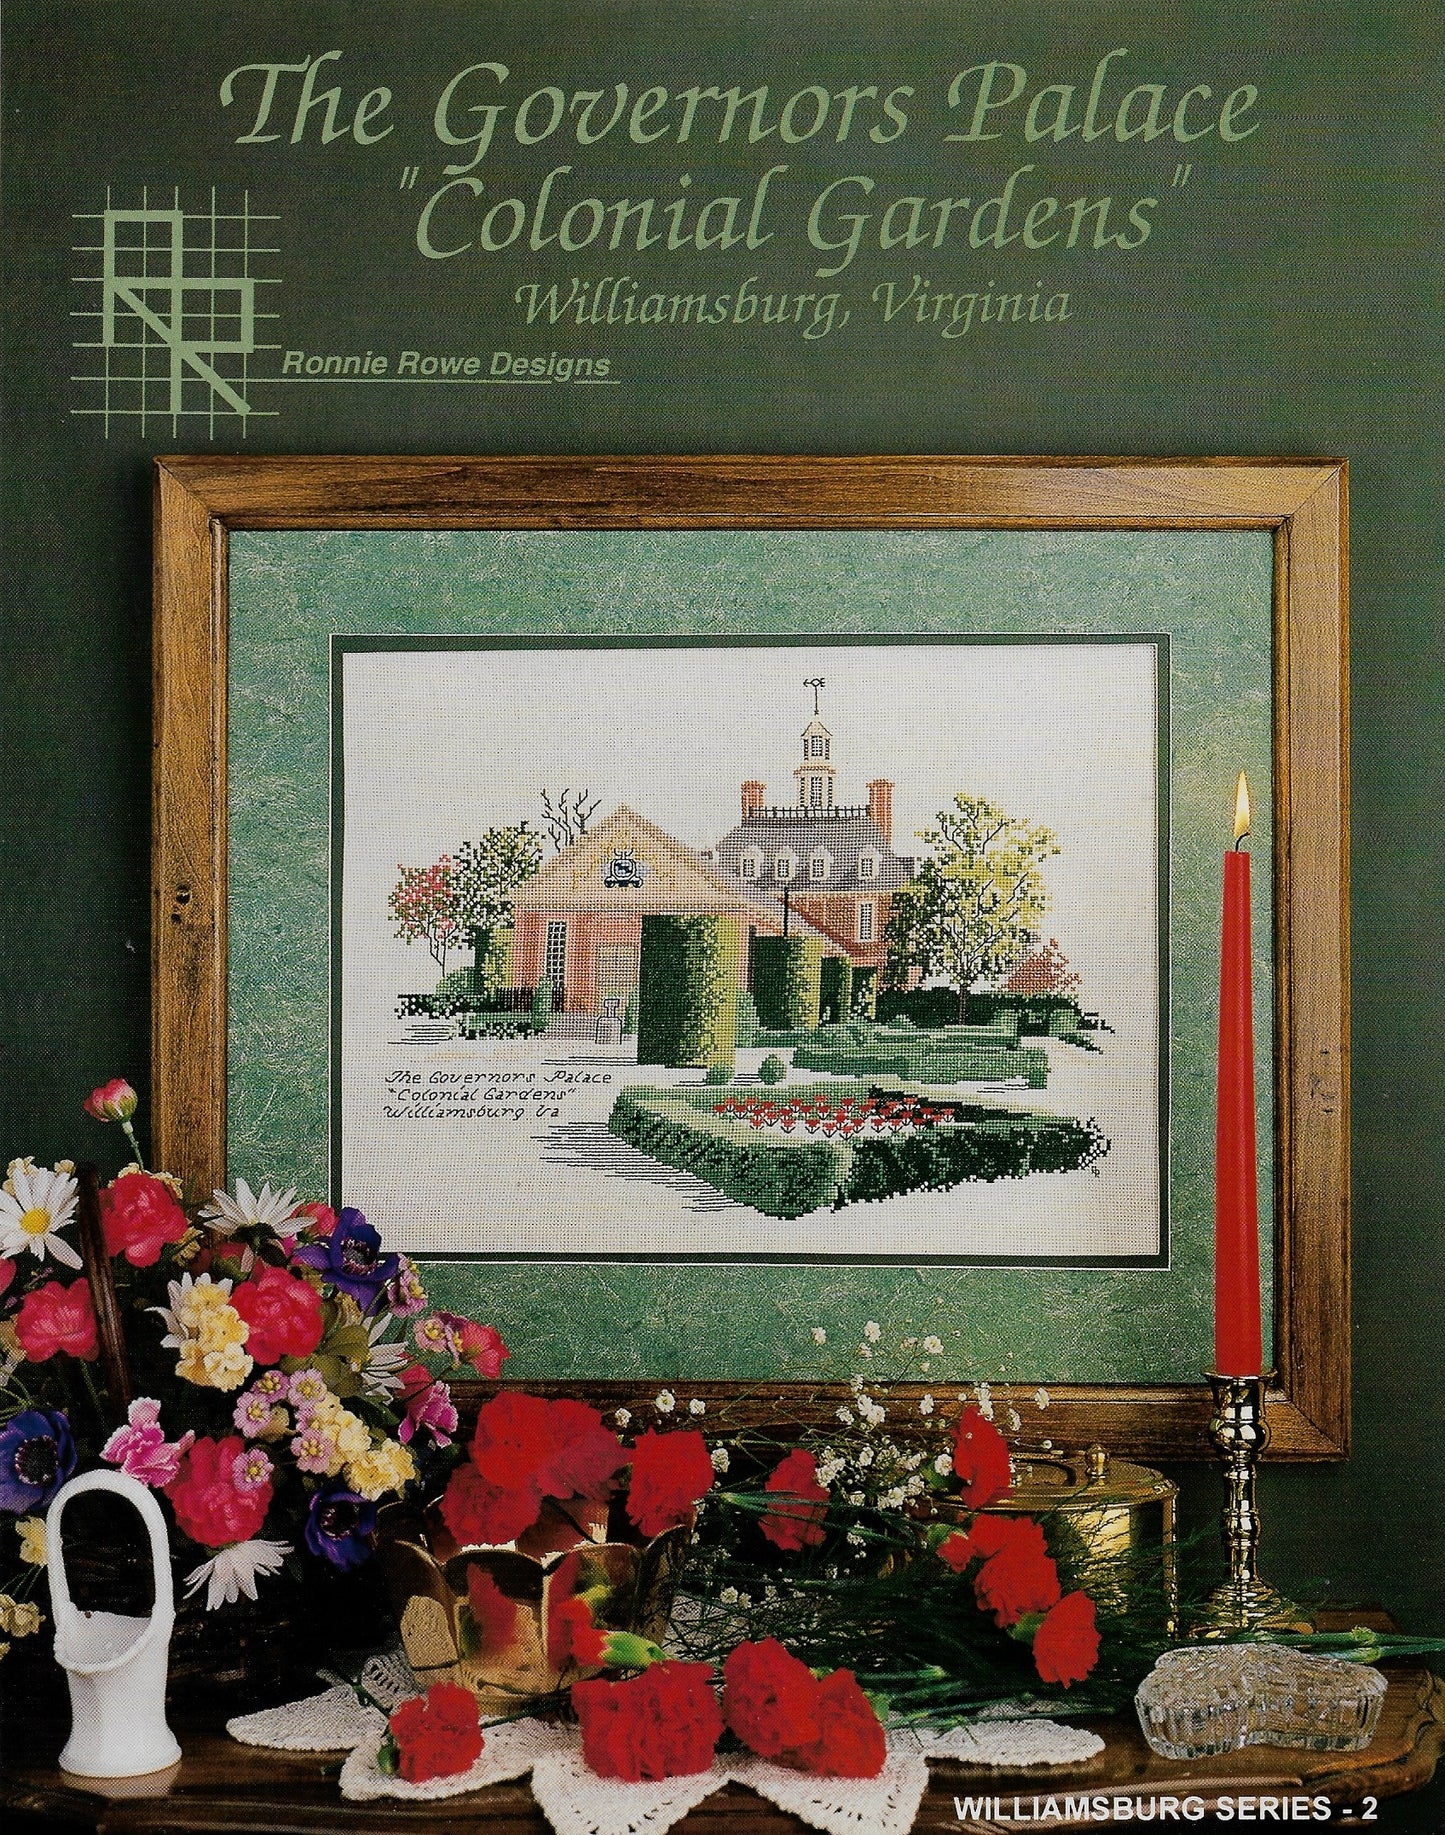 The Governors Palace "Colonial Gardens" pattern